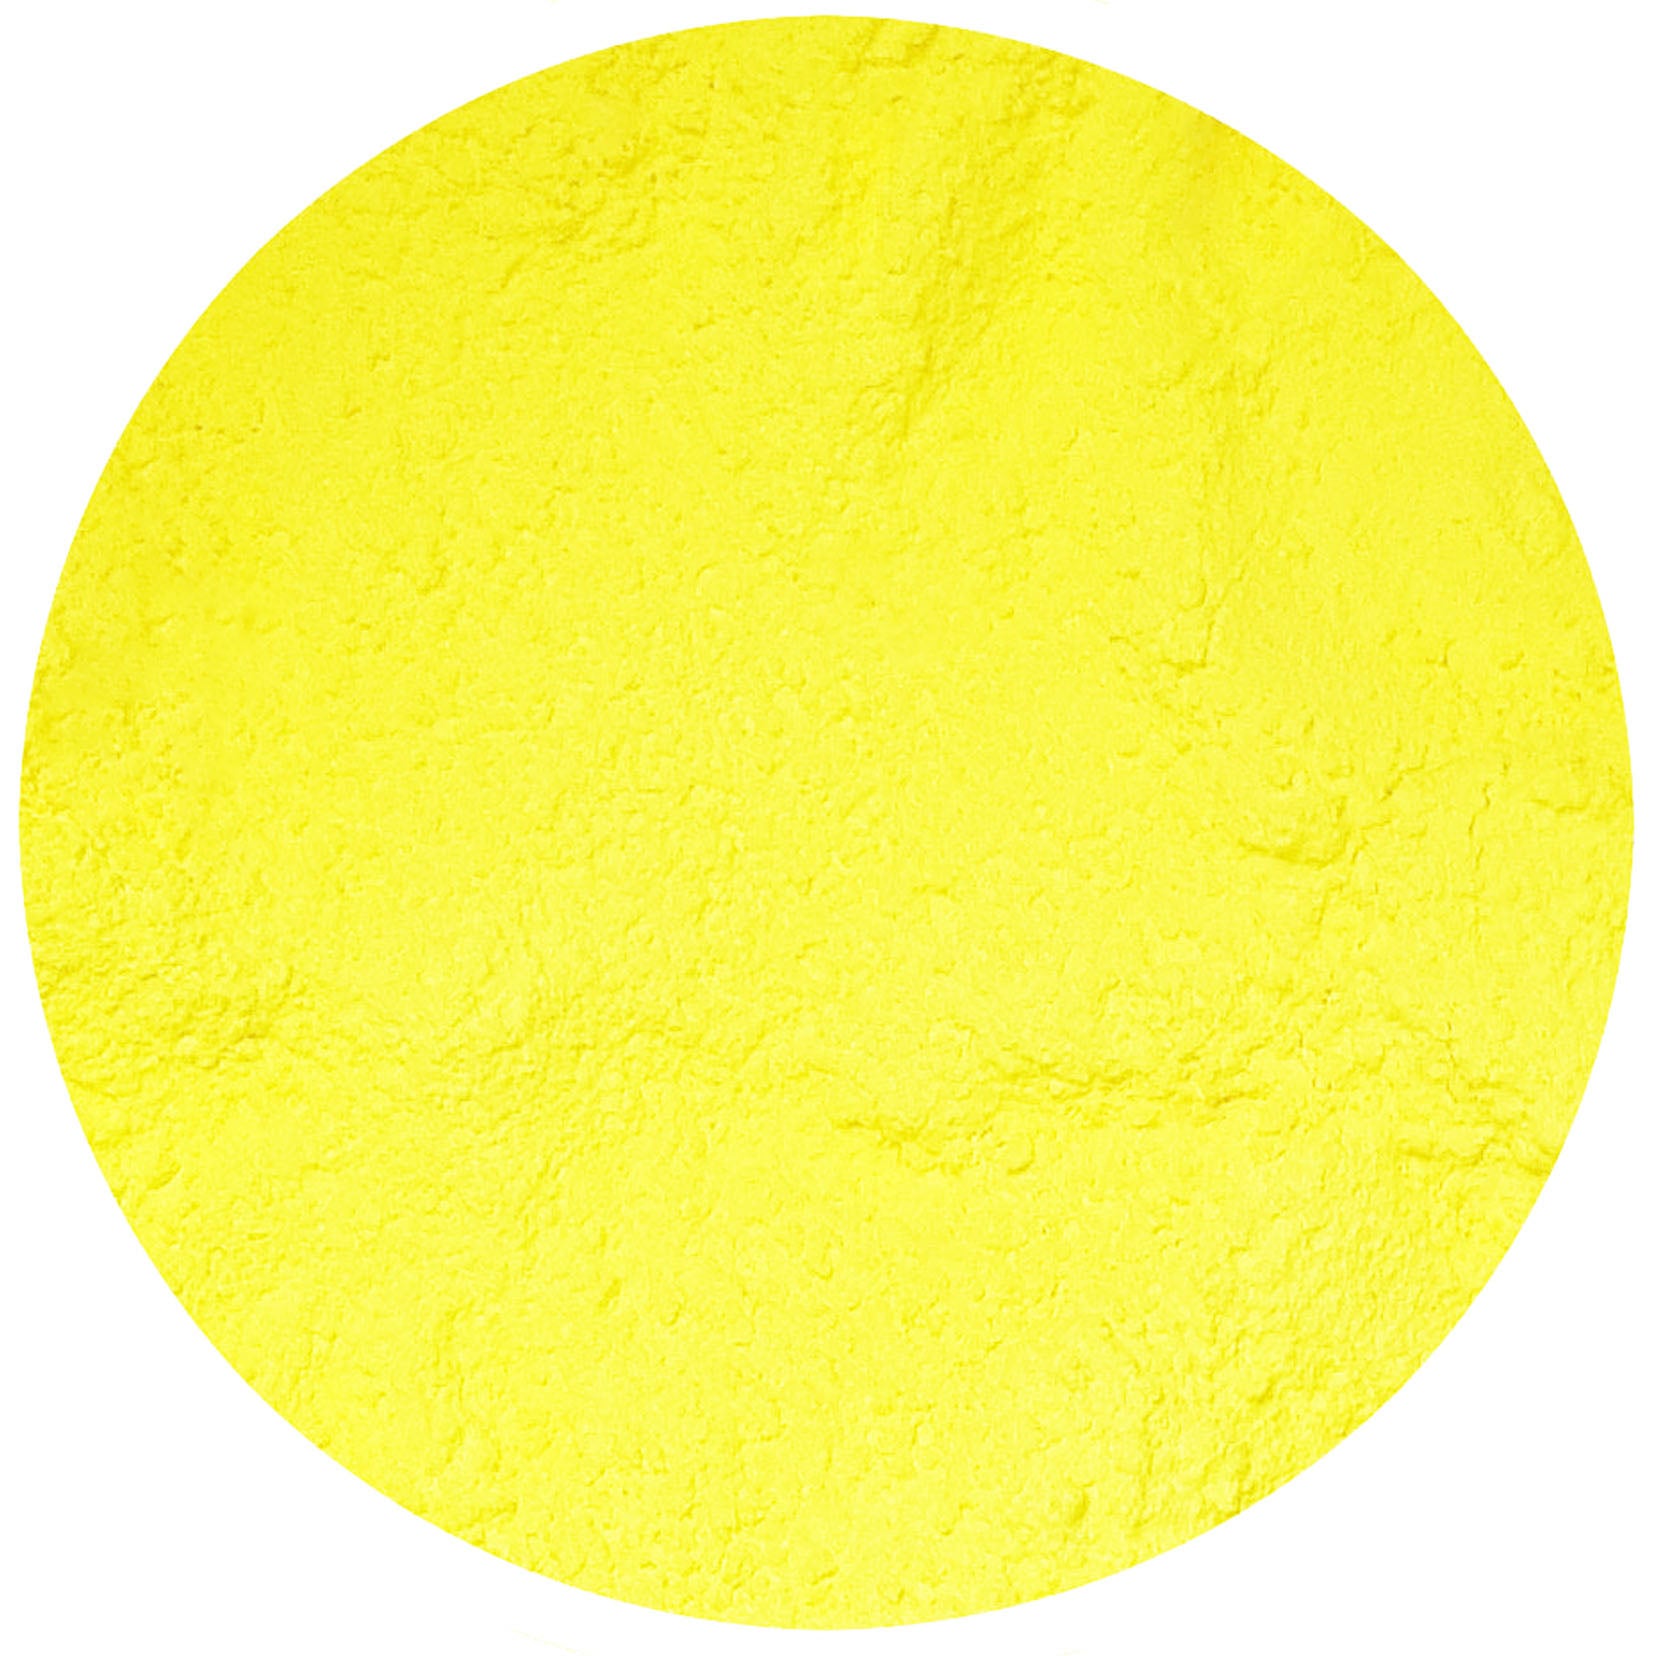 Neon Yellow Fluorescent Dye, Cosmetic Safe, Candles, Wax Melts